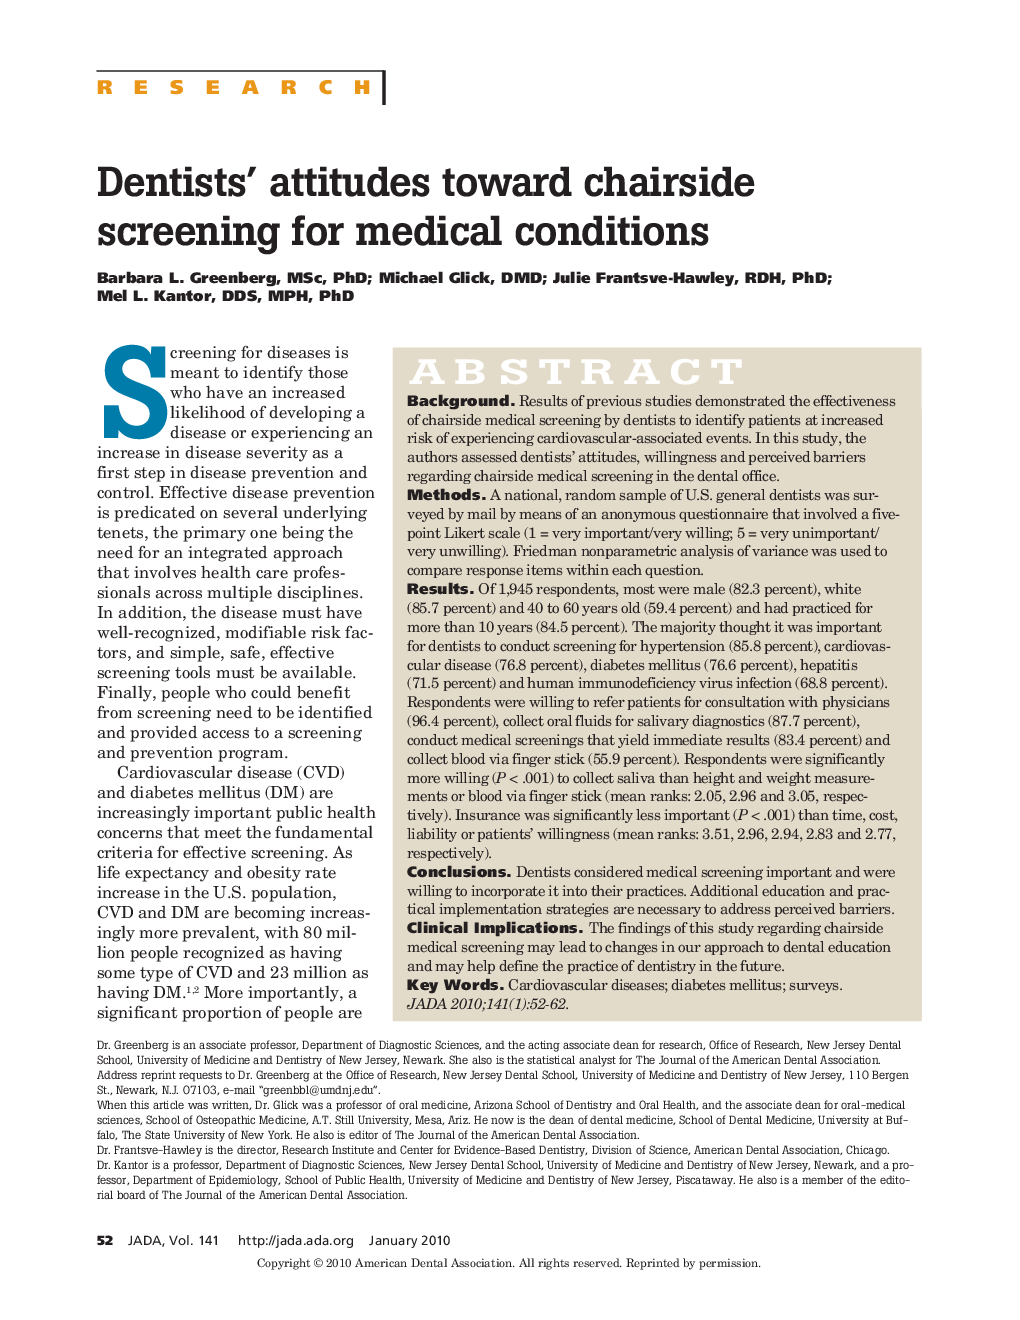 Dentists' attitudes toward chairside screening for medical conditions 